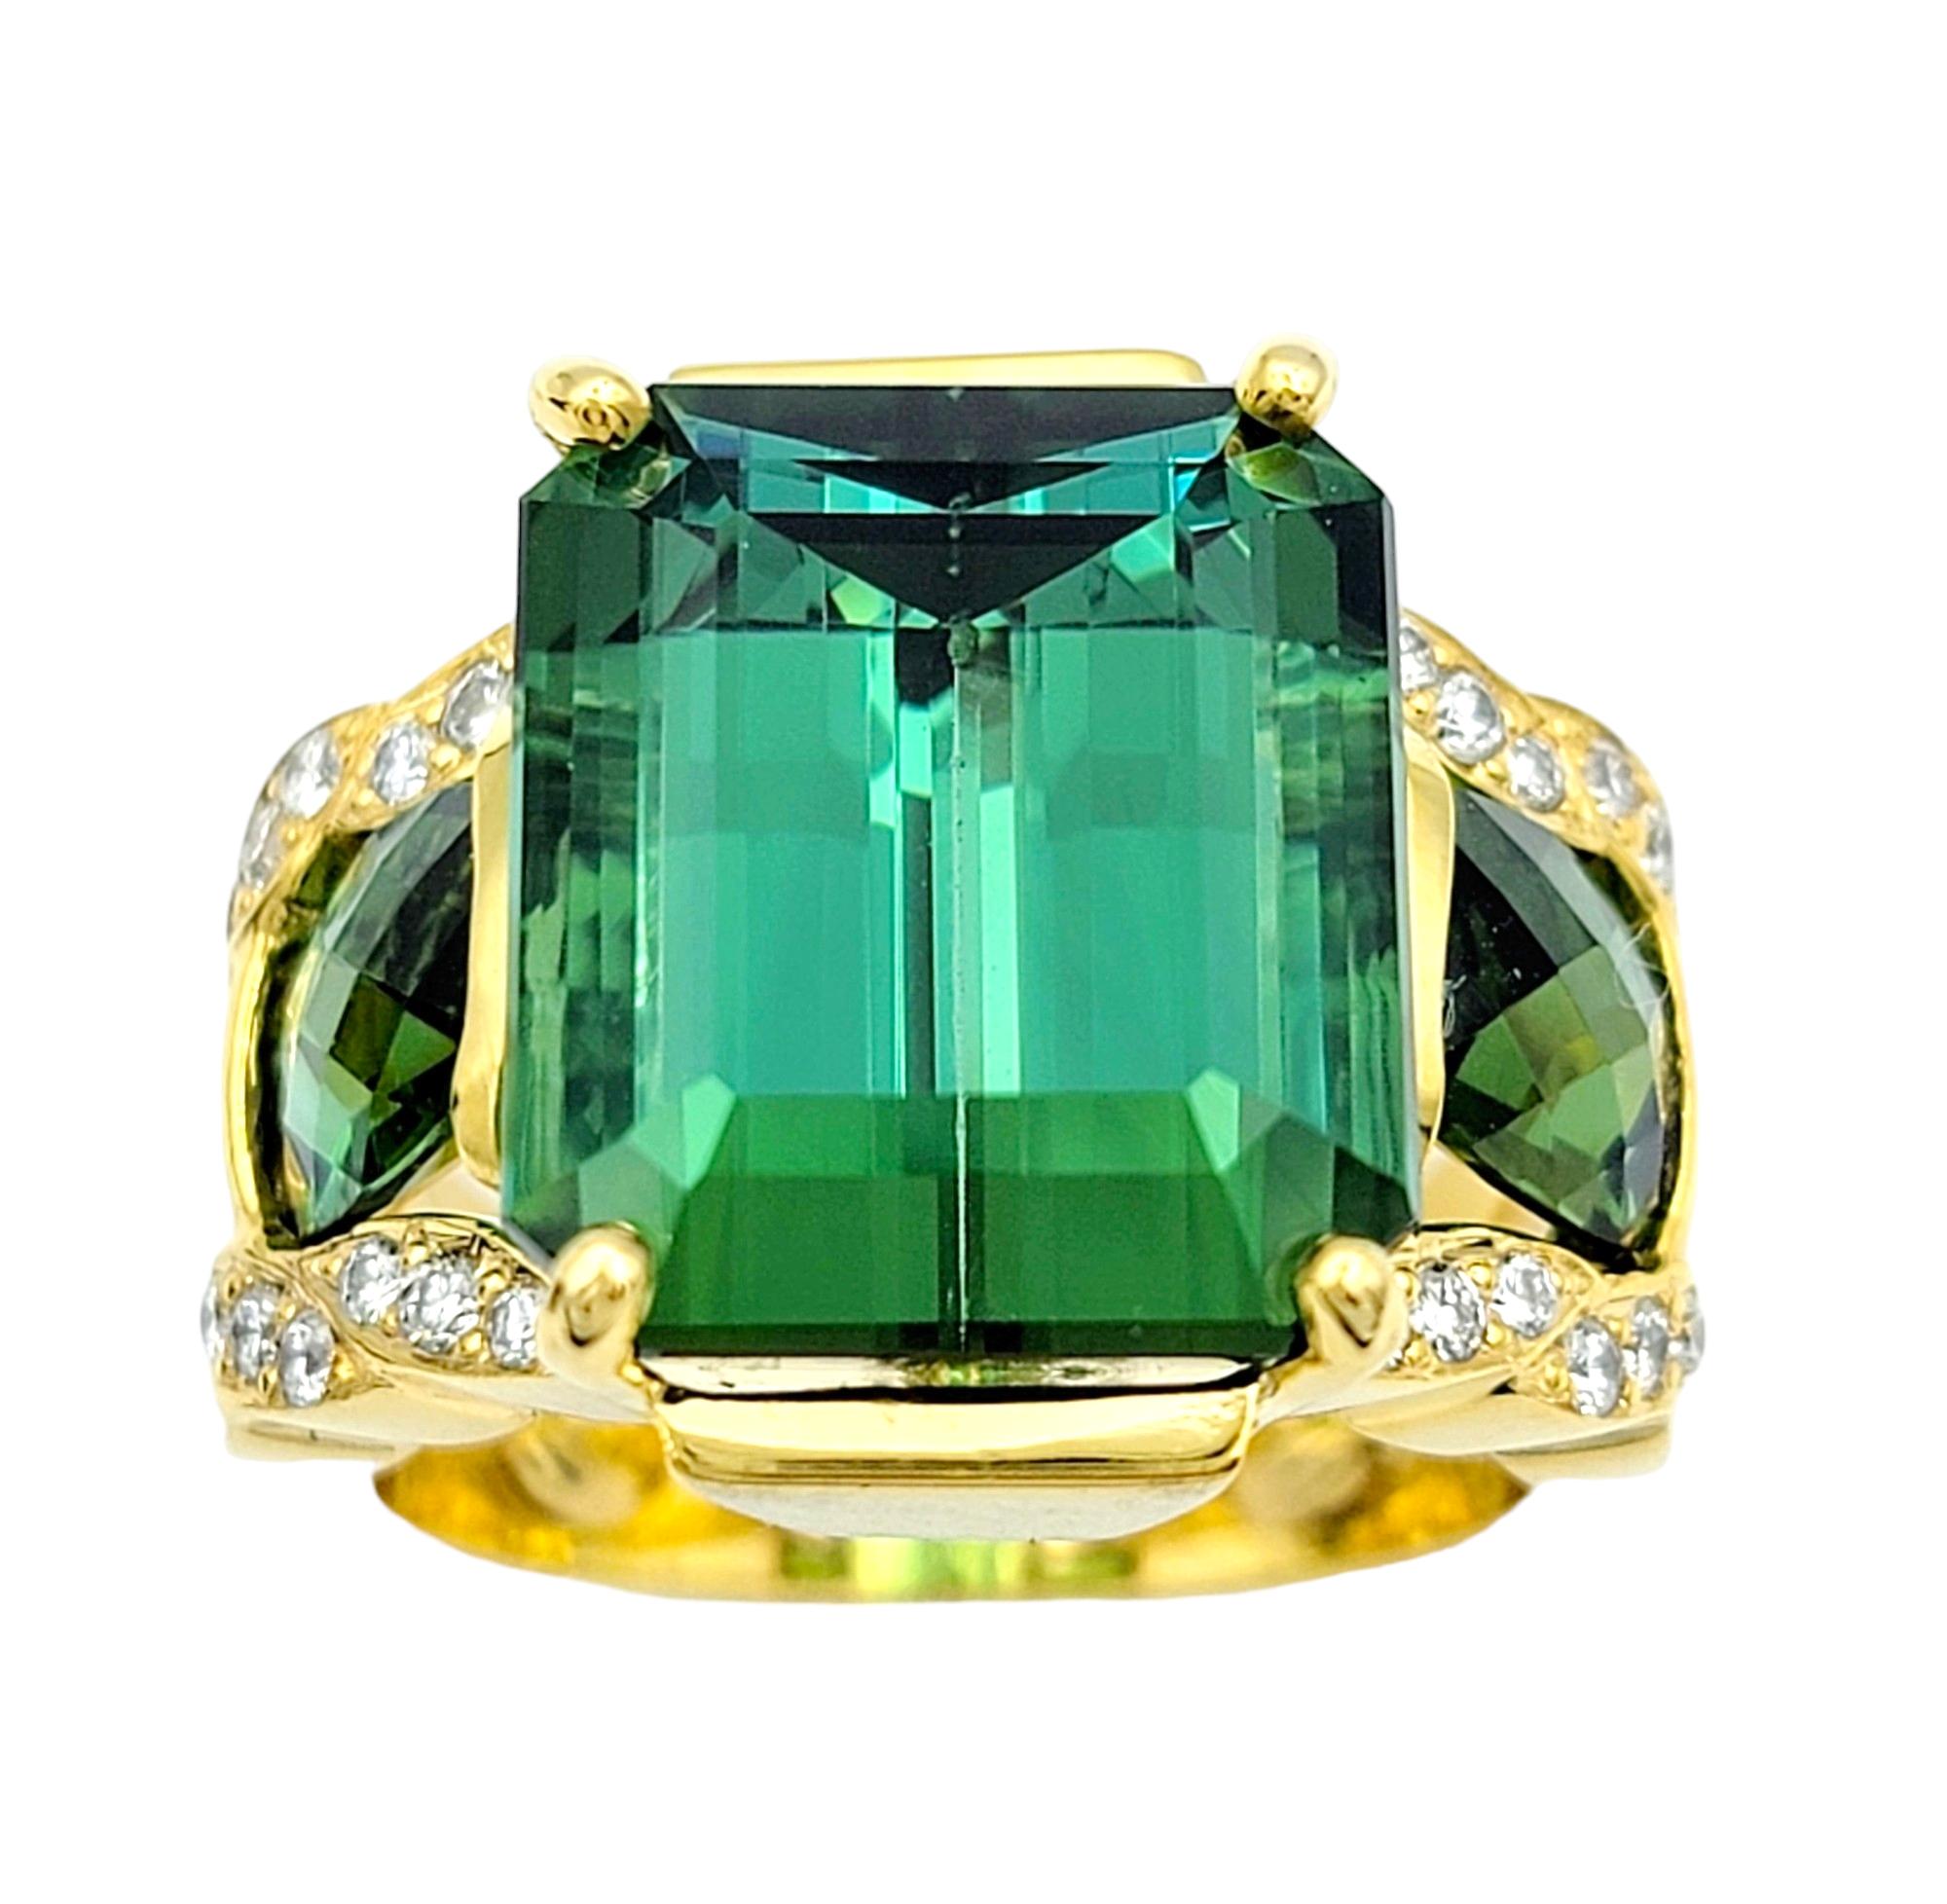 Ring size: 7

Elevate your jewelry collection with this exquisite three-stone green tourmaline ring. At its heart lies a captivating 13.25 carat emerald step cut tourmaline, exuding elegance and sophistication. Flanked by two checkerboard cut